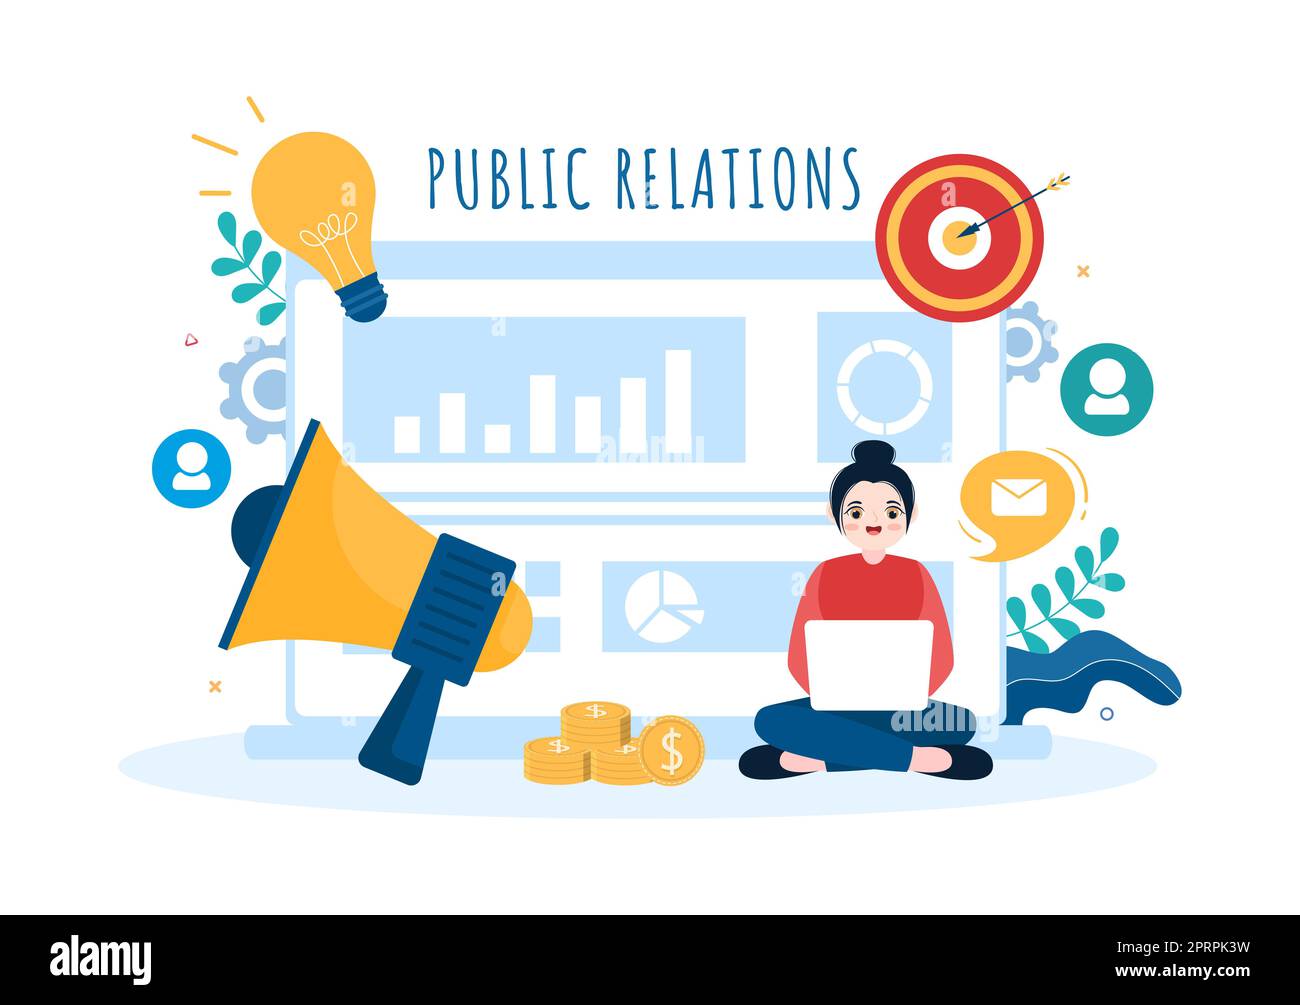 Public Relations Template Hand Drawn Cartoon Flat Illustration with Team for Idea of Marketing Campaign Through Mass Media to Advertise your Business Stock Photo